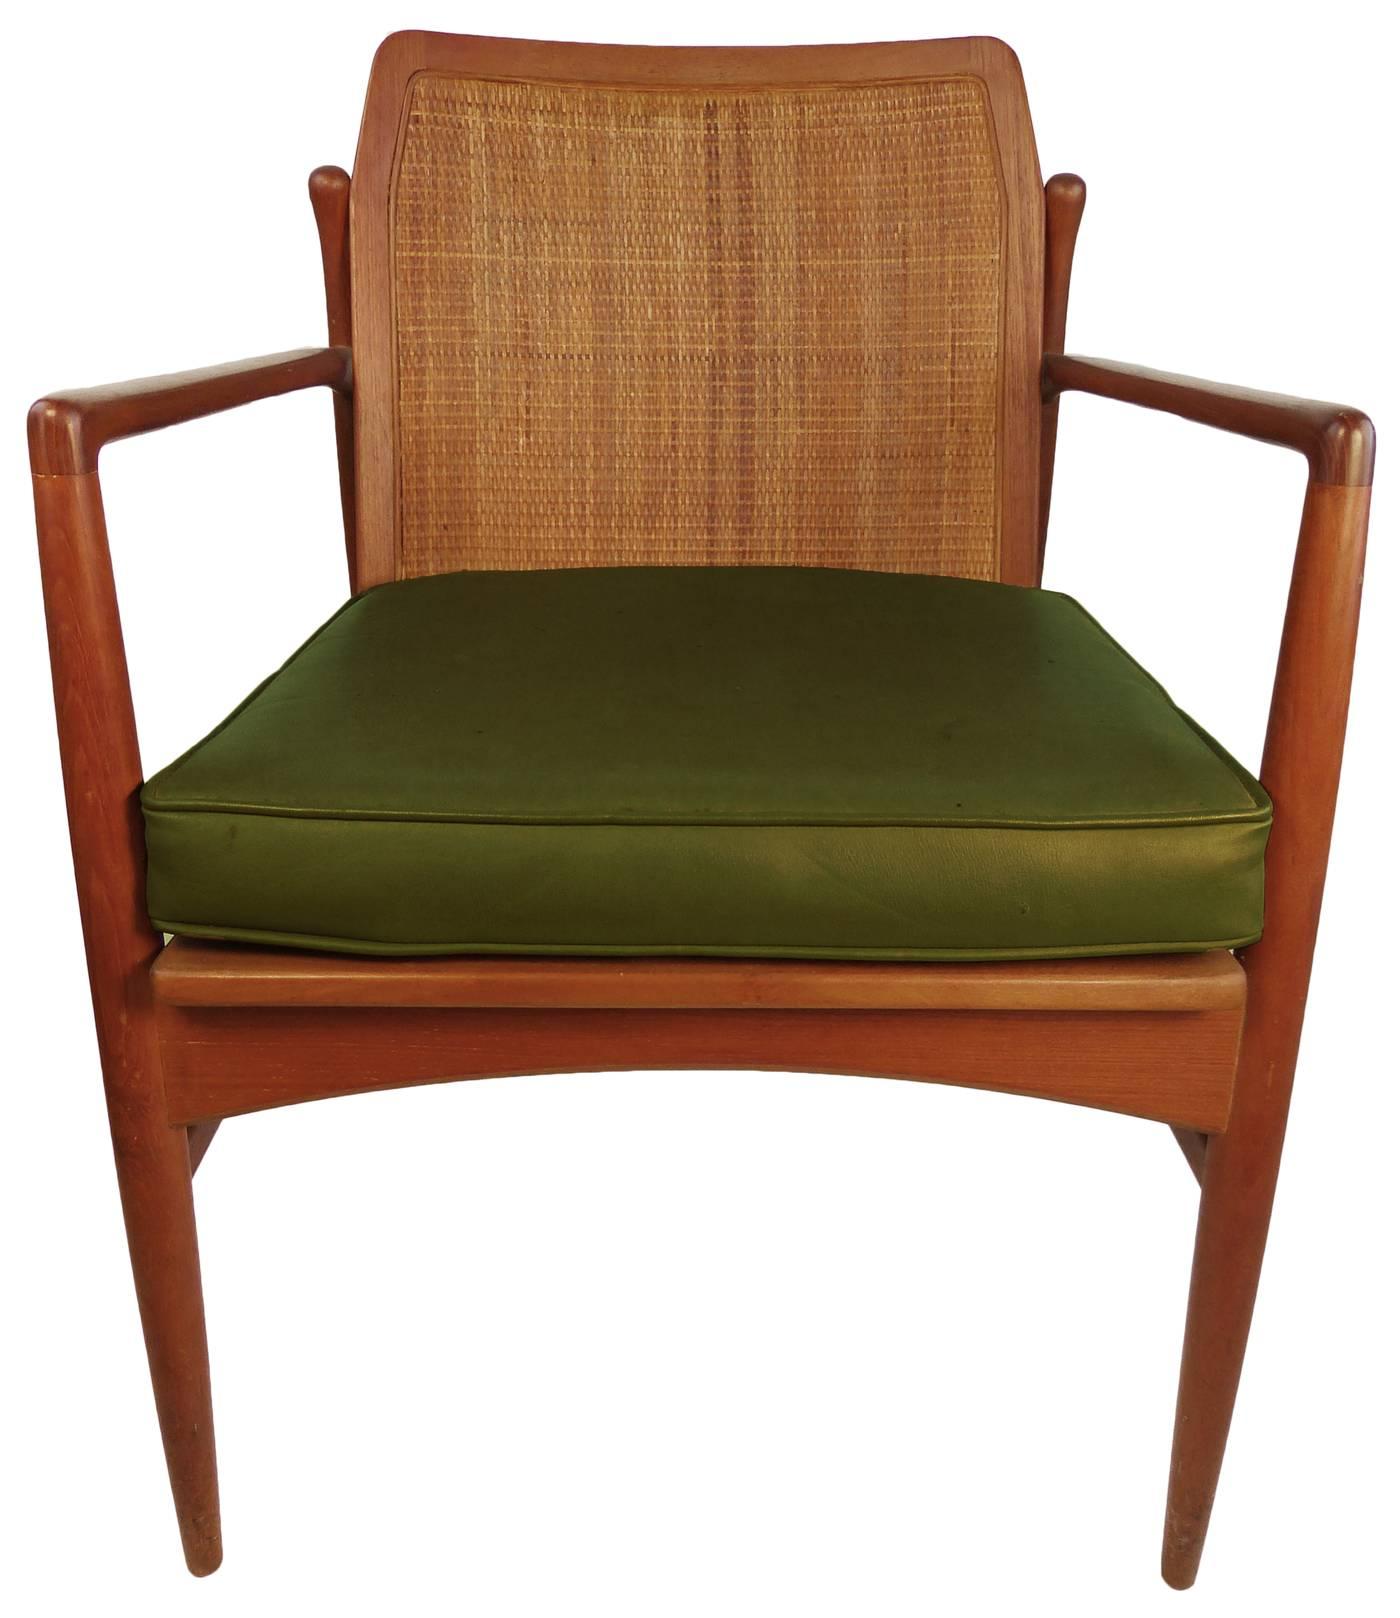 A Classic Mid-Century Modern armchair, with caned backrest and green vinyl cushion.